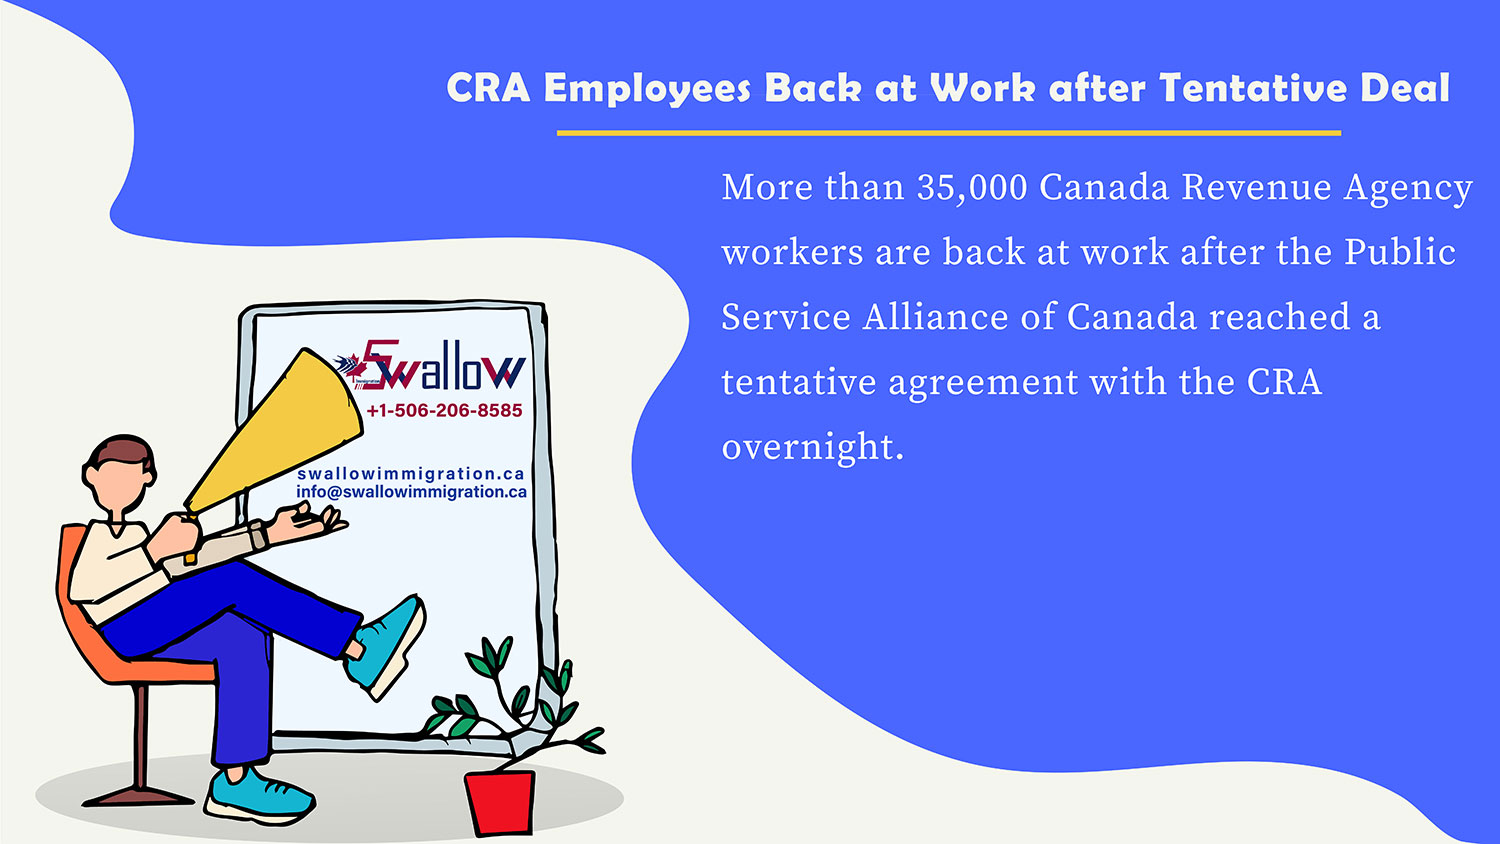 CRA Employees Back at Work after Tentative Deal